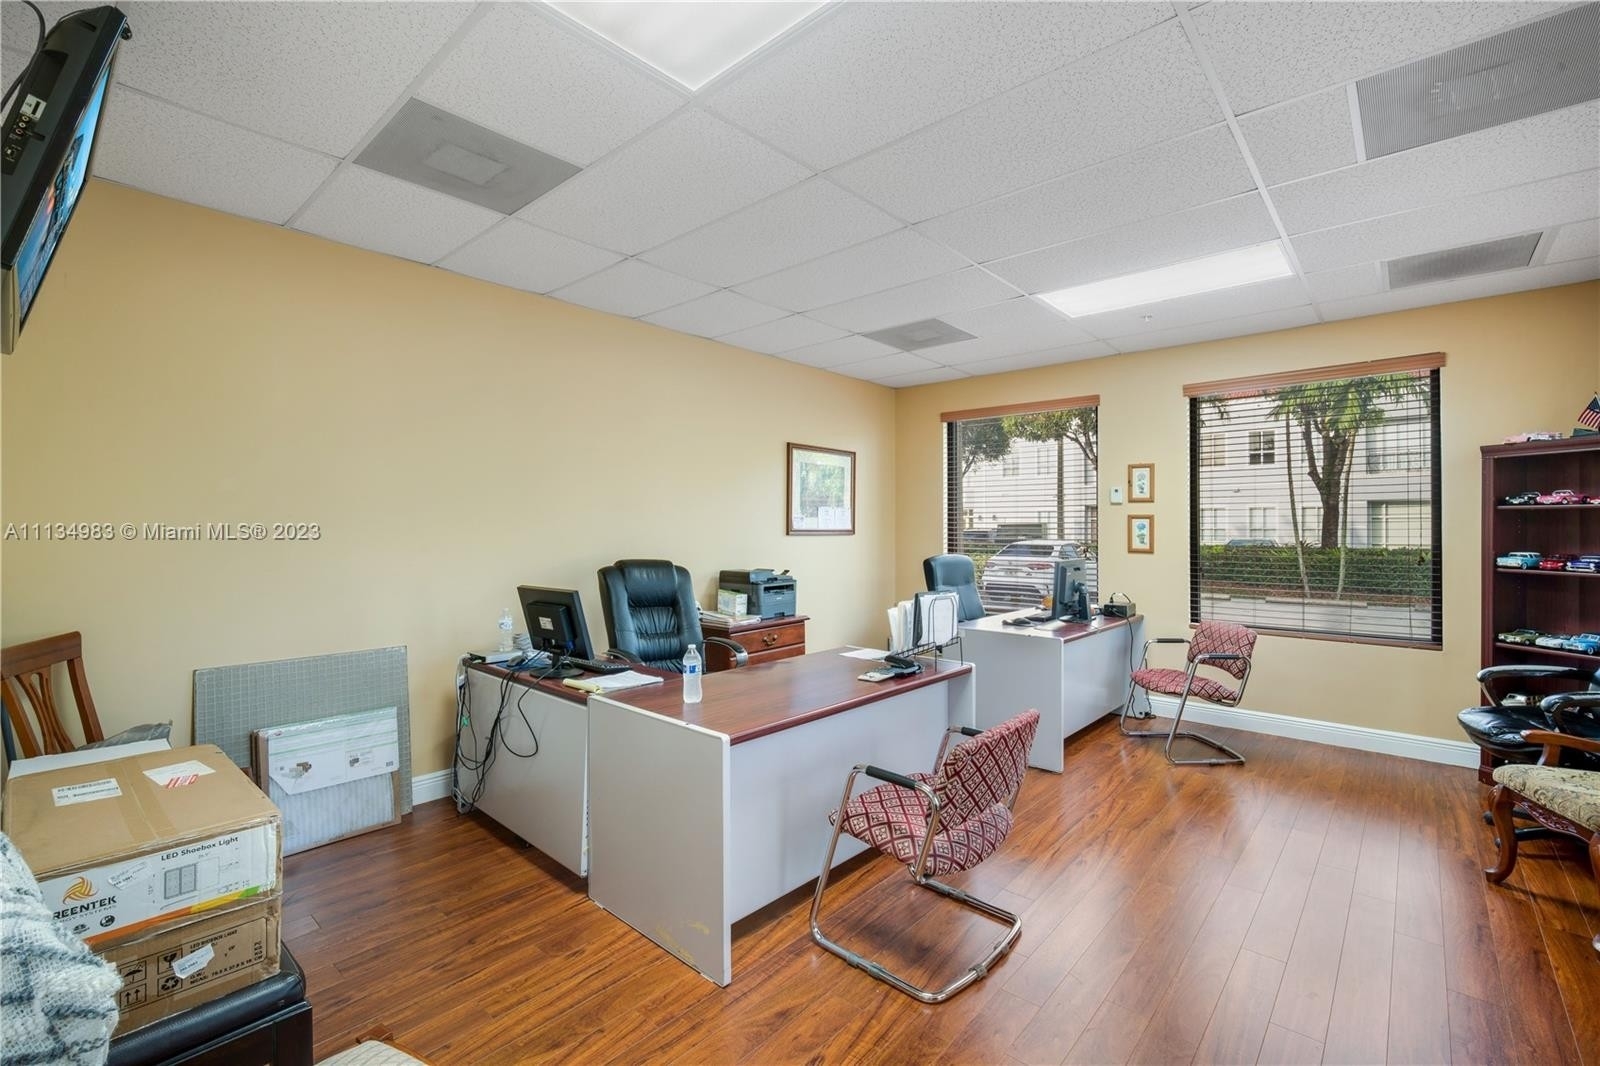 19. Commercial / Office for Sale at Miami, FL 33185